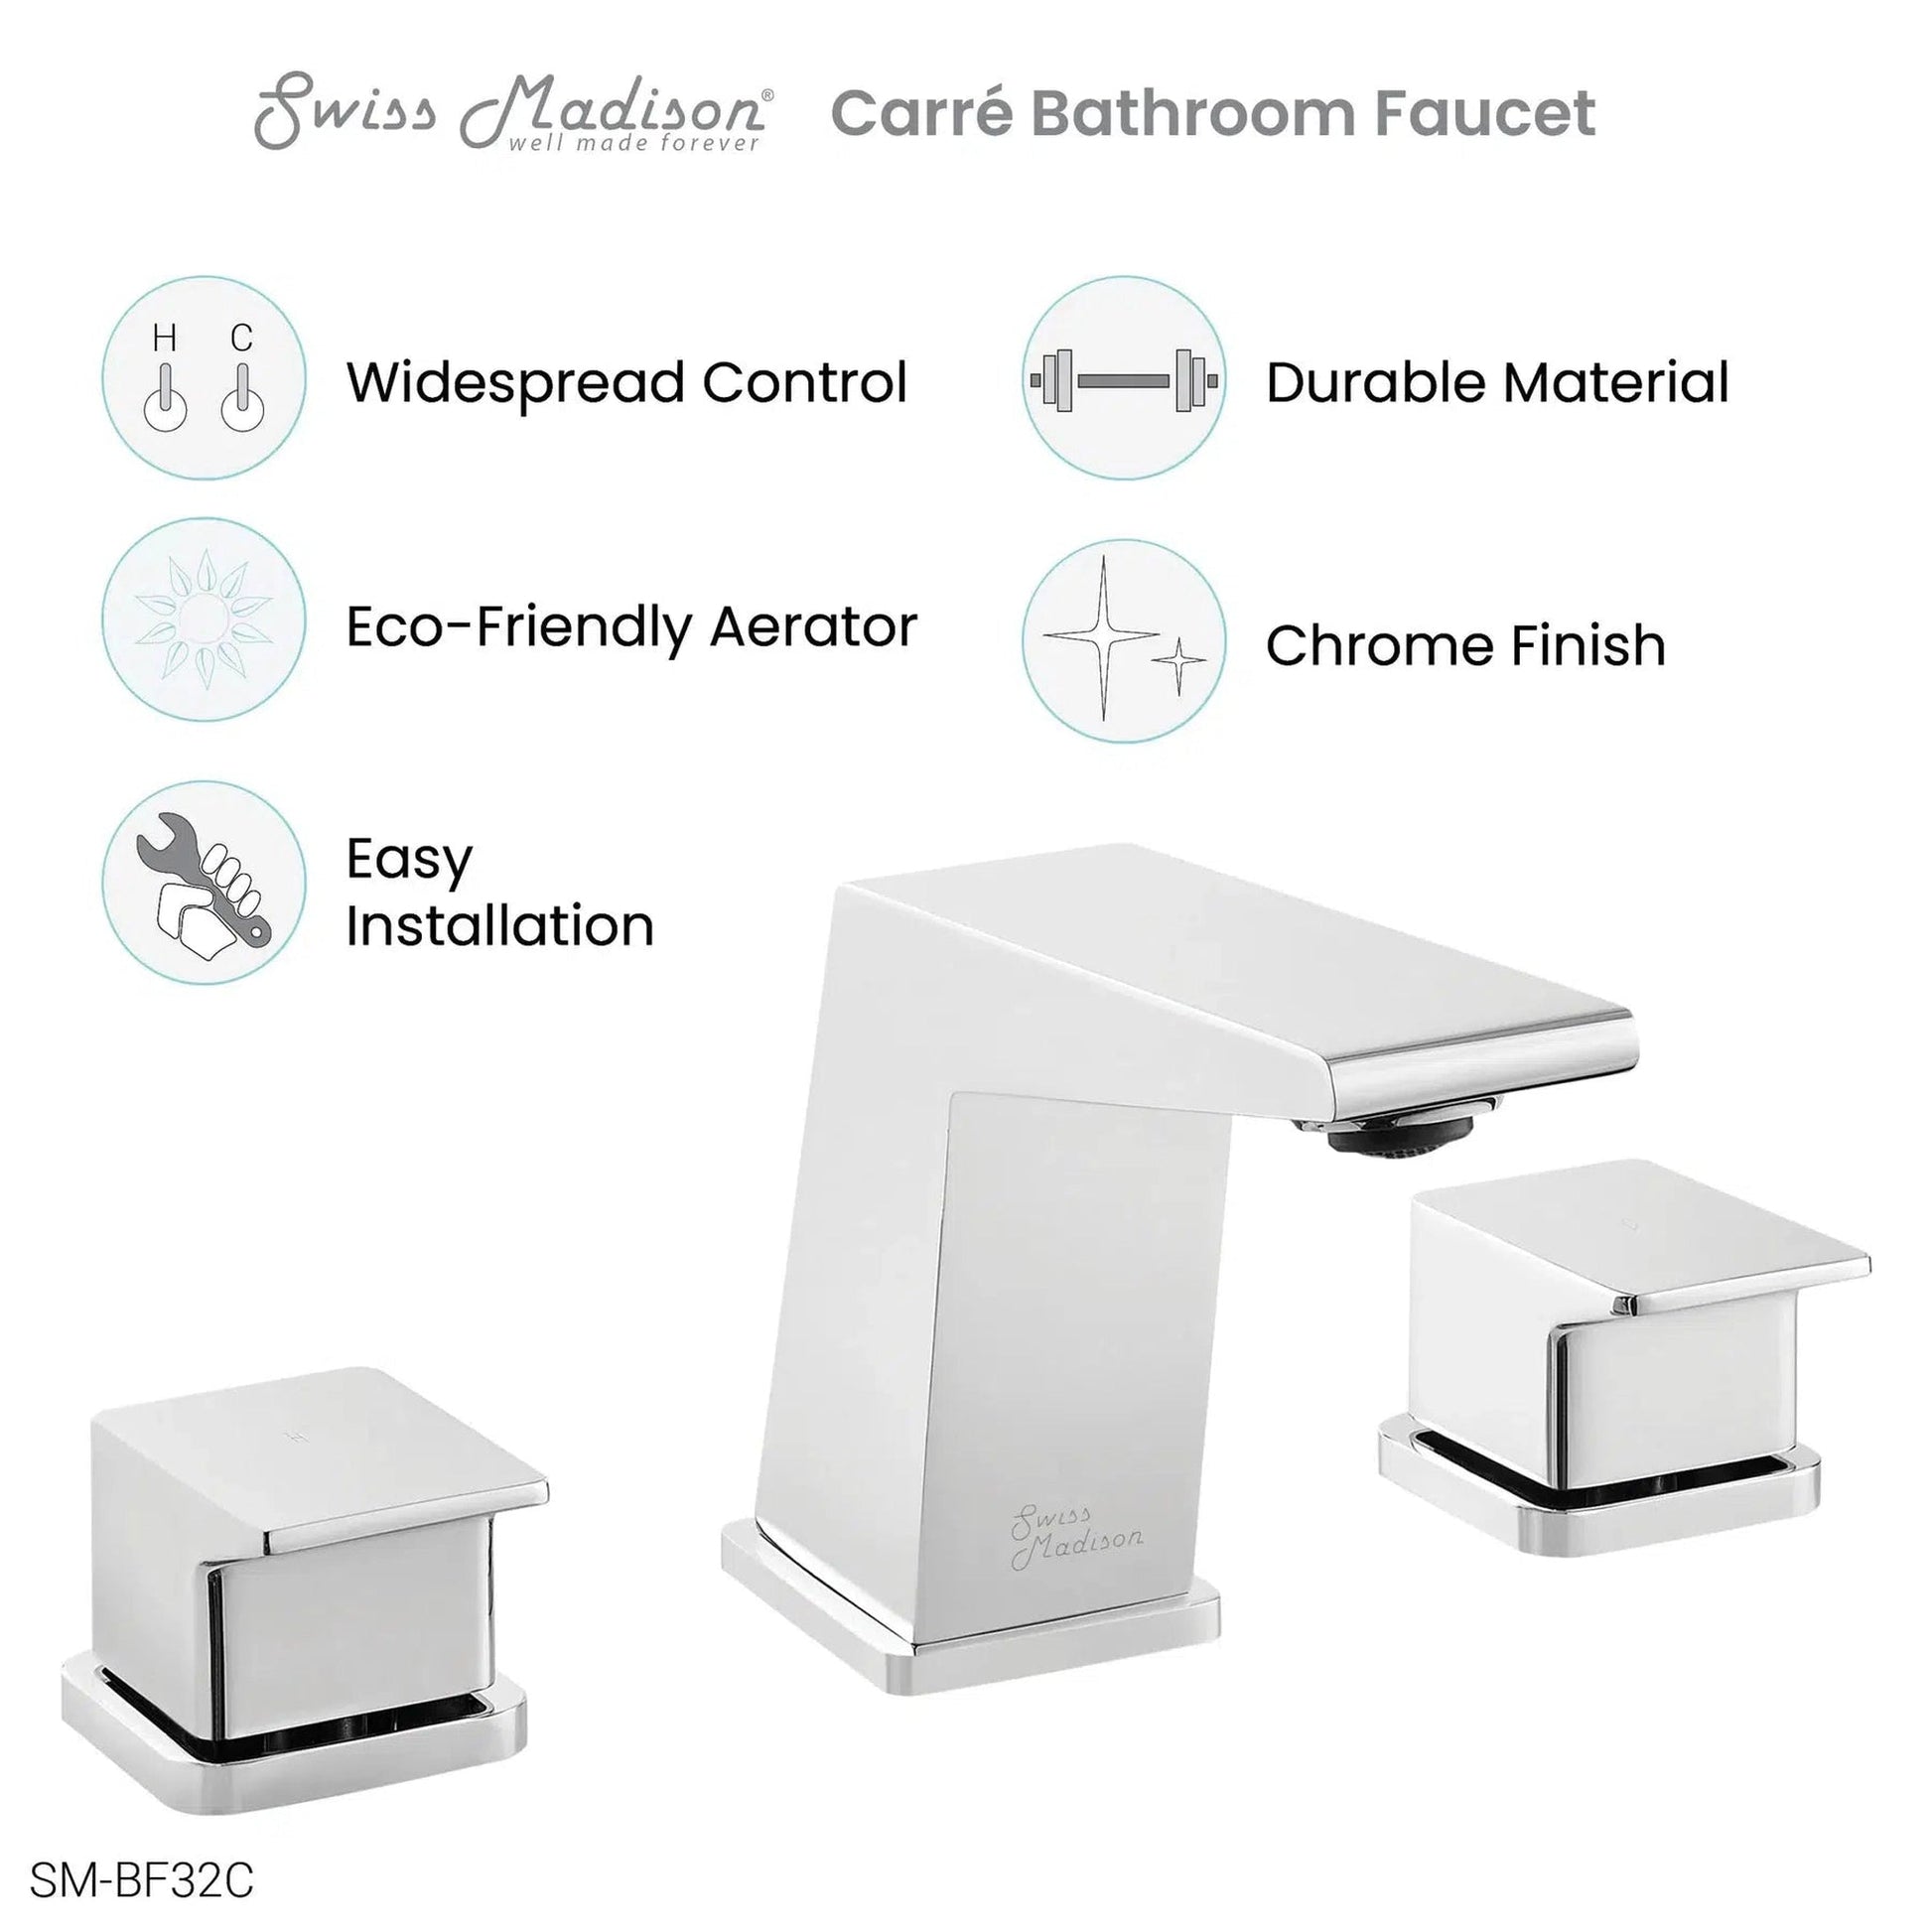 Swiss Madison Carré 8" Chrome Widespread Bathroom Faucet With Knob Handles and 1.2 GPM Flow Rate